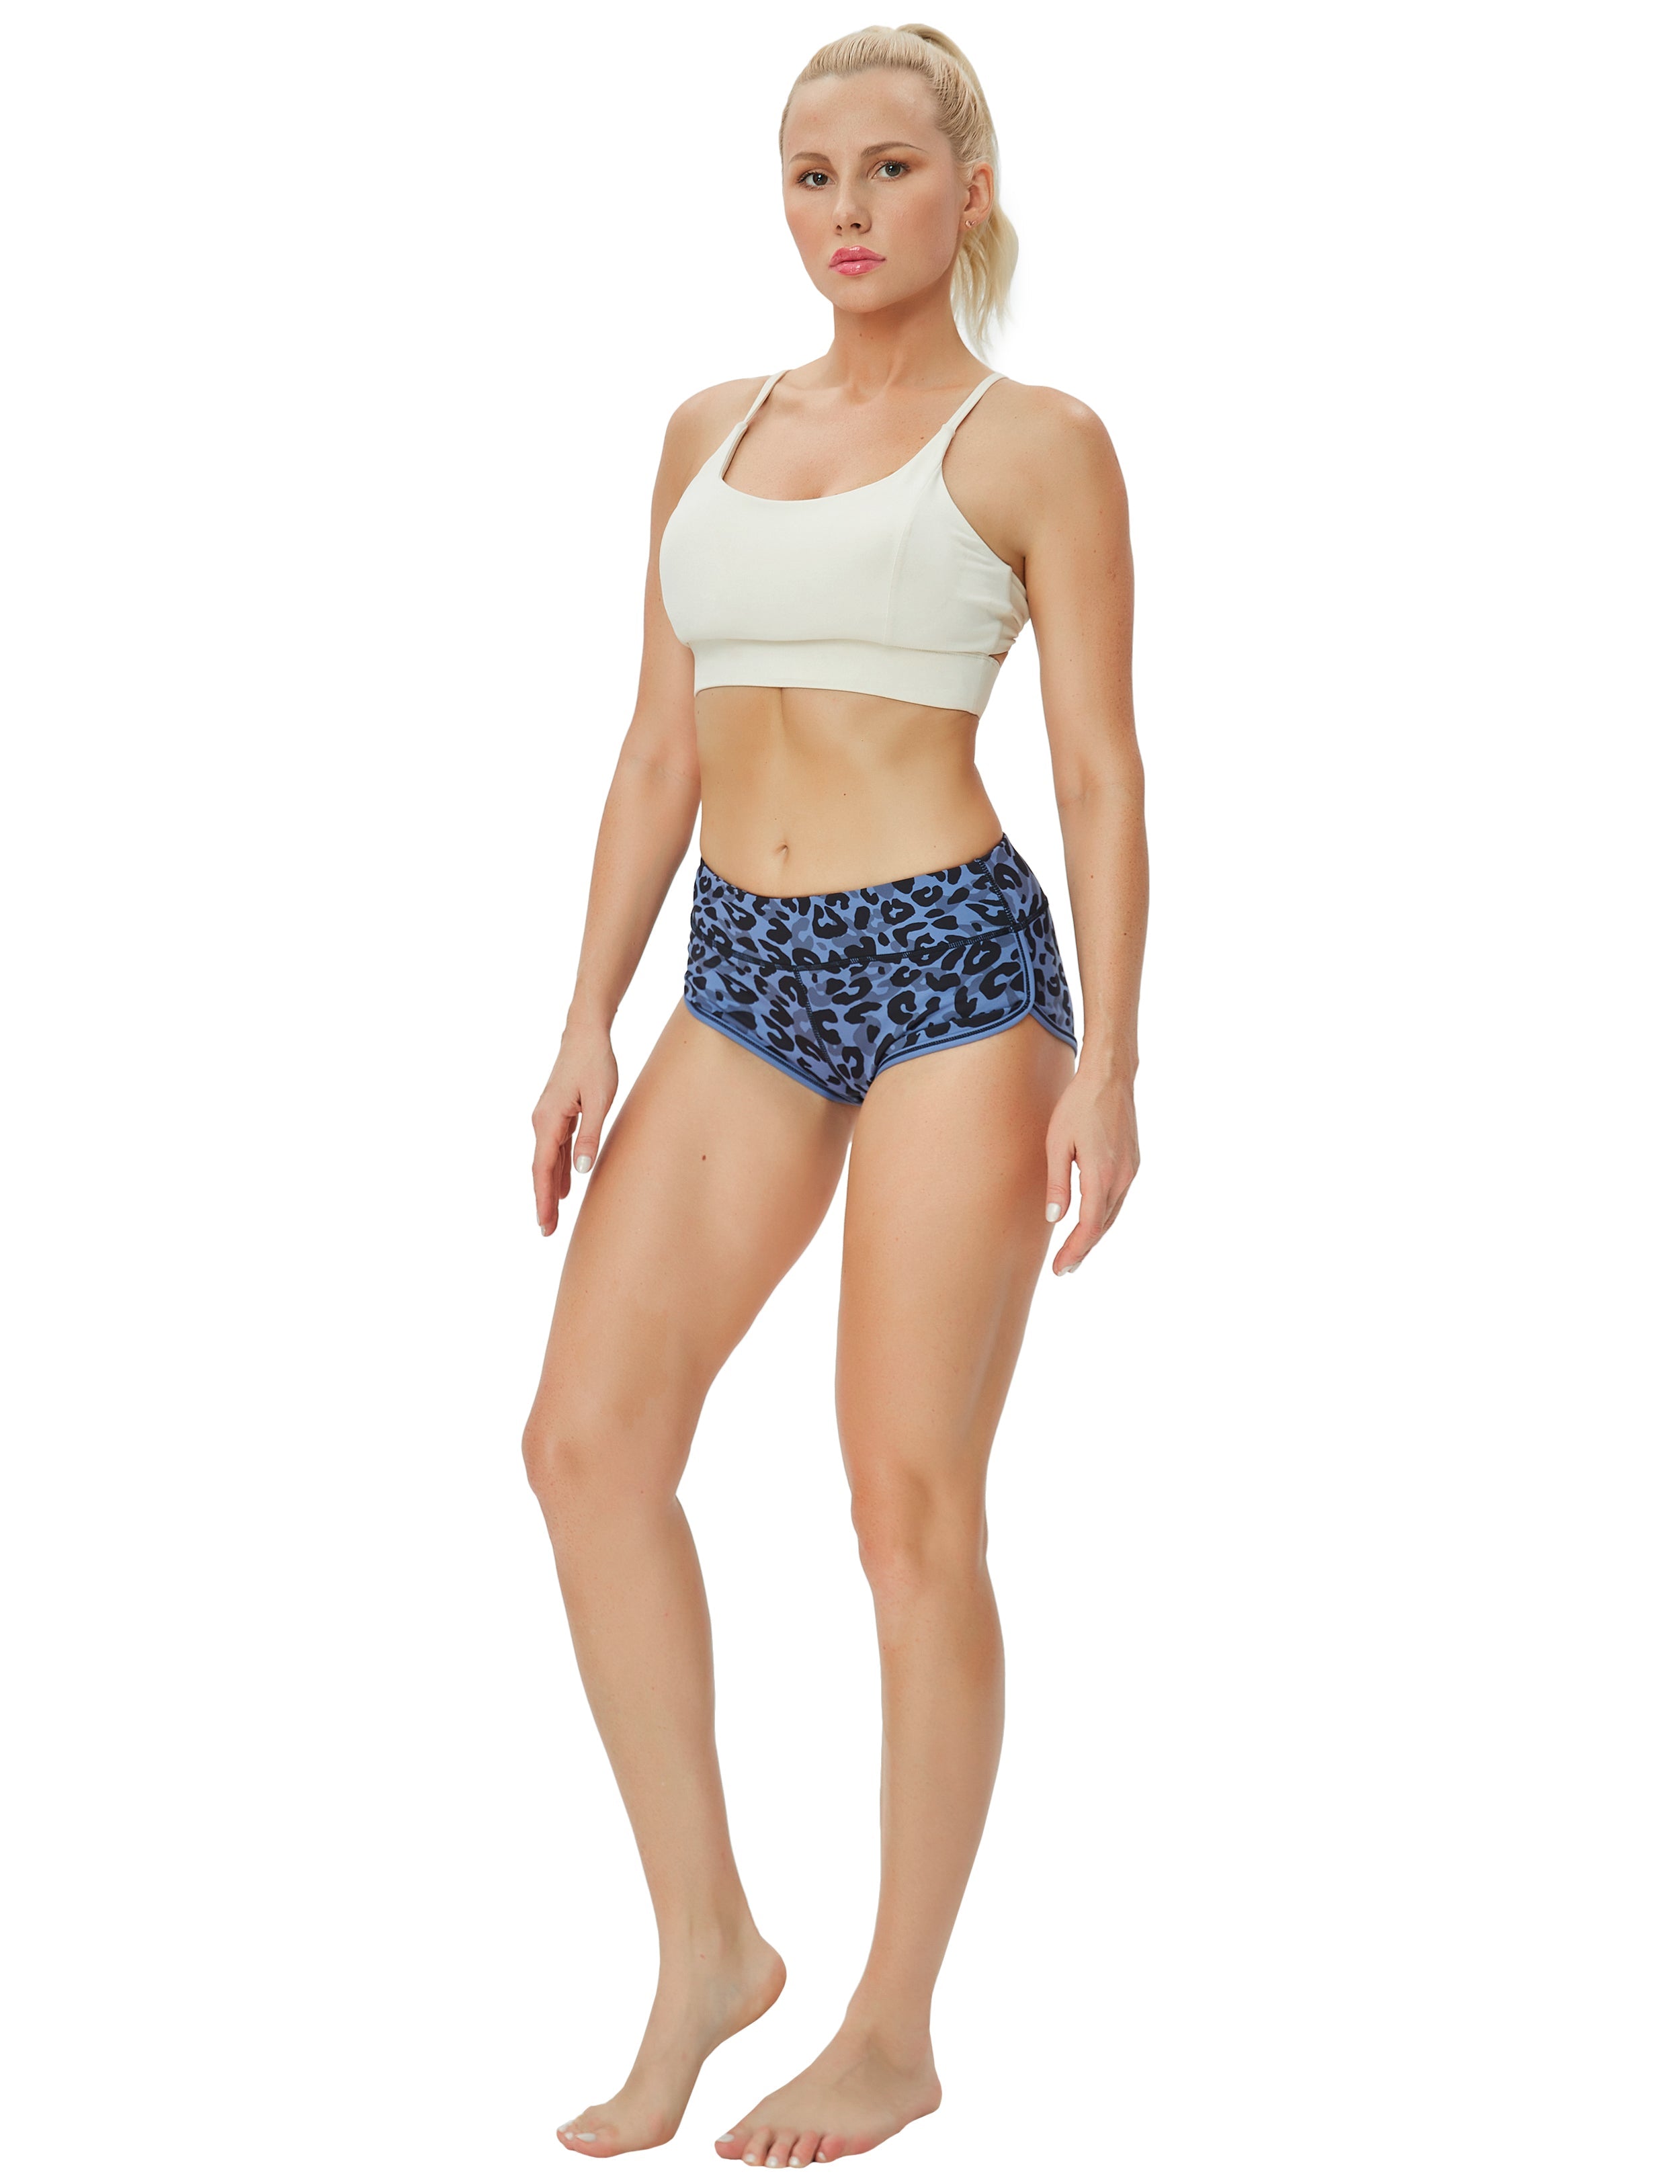 Printed Booty Golf Shorts navy_leopard Sleek, soft, smooth and totally comfortable: our newest sexy style is here. Softest-ever fabric High elasticity High density 4-way stretch Fabric doesn't attract lint easily No see-through Moisture-wicking Machine wash 78% Polyester, 22% Spandex